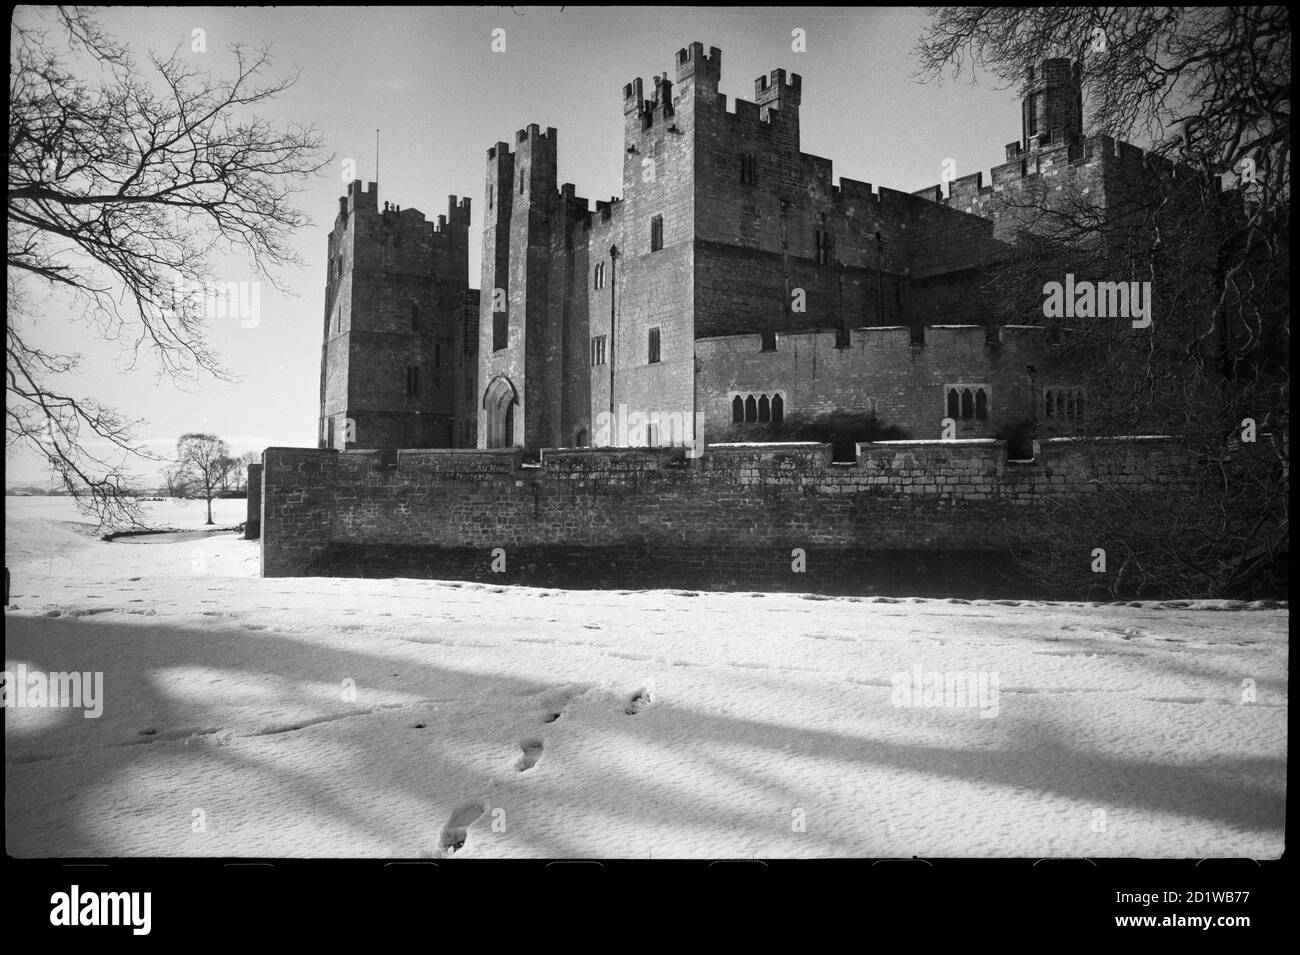 Raby Castle, Raby With Keverstone, Raby With Keverstone, County Durham. An exterior view of Raby Castle, showing the east elevation from the south-east, with a low curtain wall in the foreground. Stock Photo